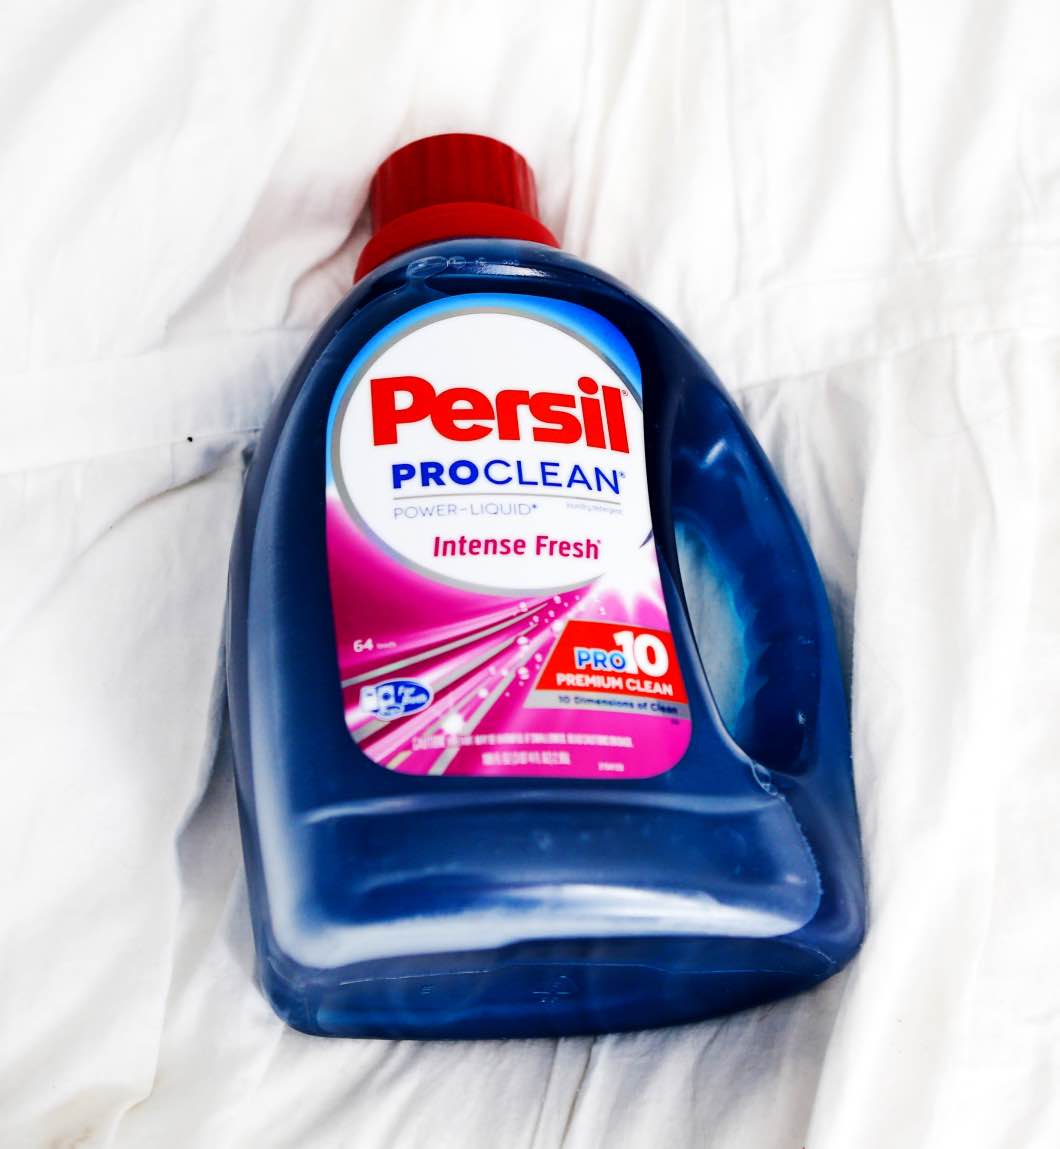 Persil Stain Remover for Baby Clothes